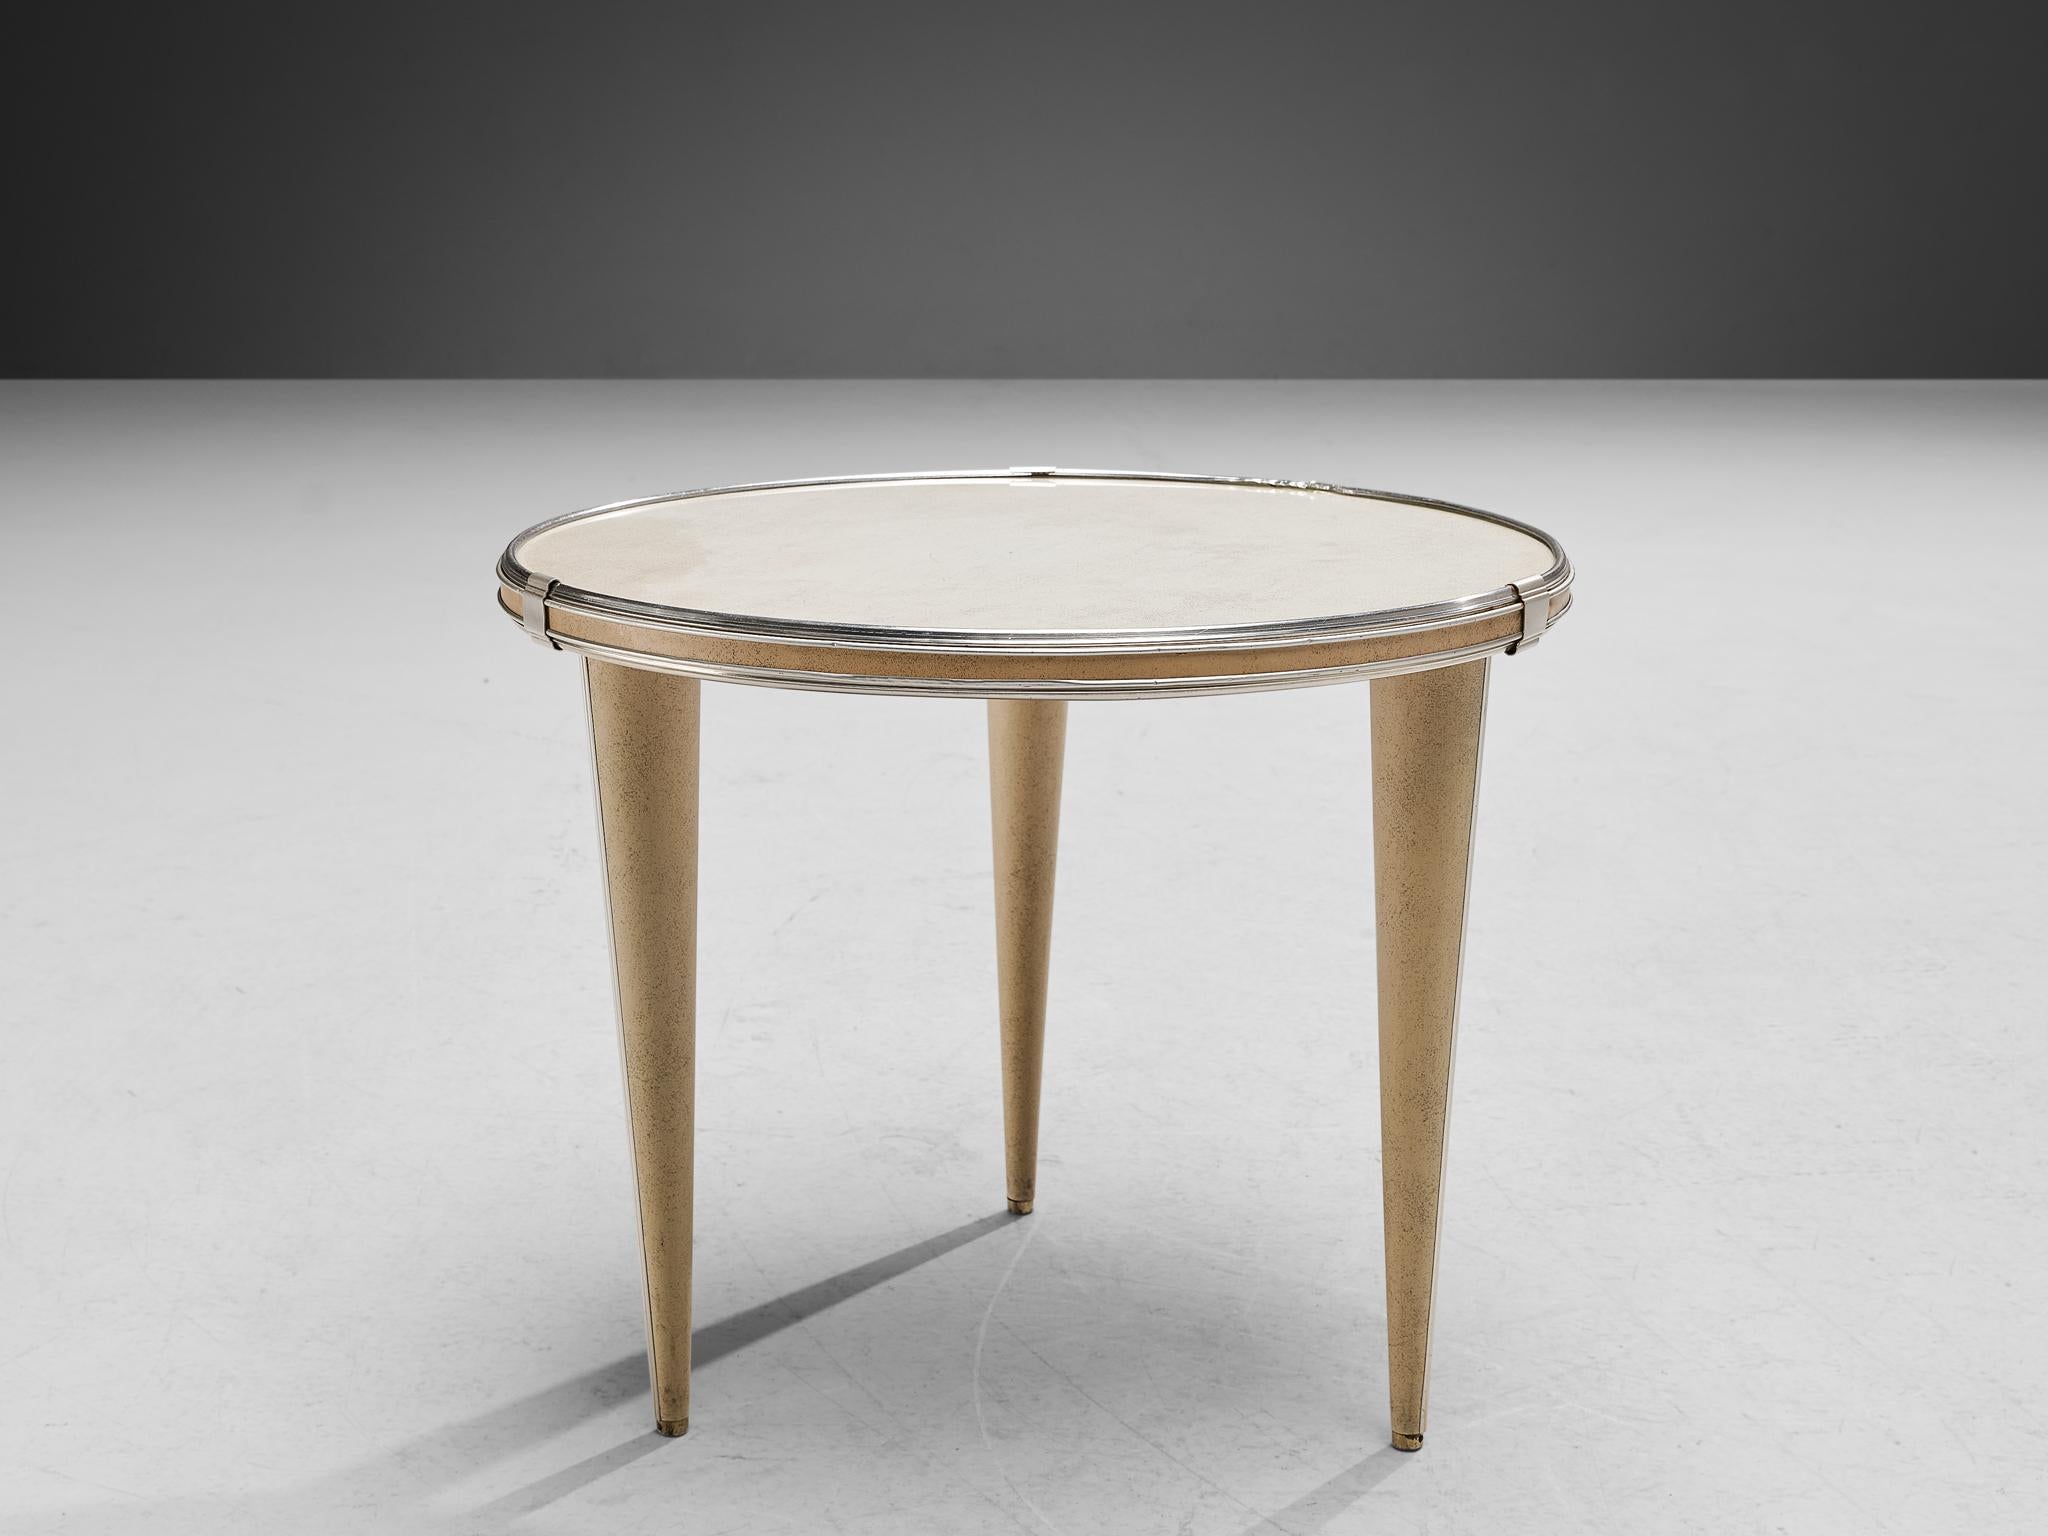 Umberto Mascagni, coffee table, vinyl, brass, chrome-plated aluminum, Italy, circa. 1960

Charming coffee table that originates from Italy, featuring clear shapes and an interesting combination of materials. The tabletop and legs are executed in an